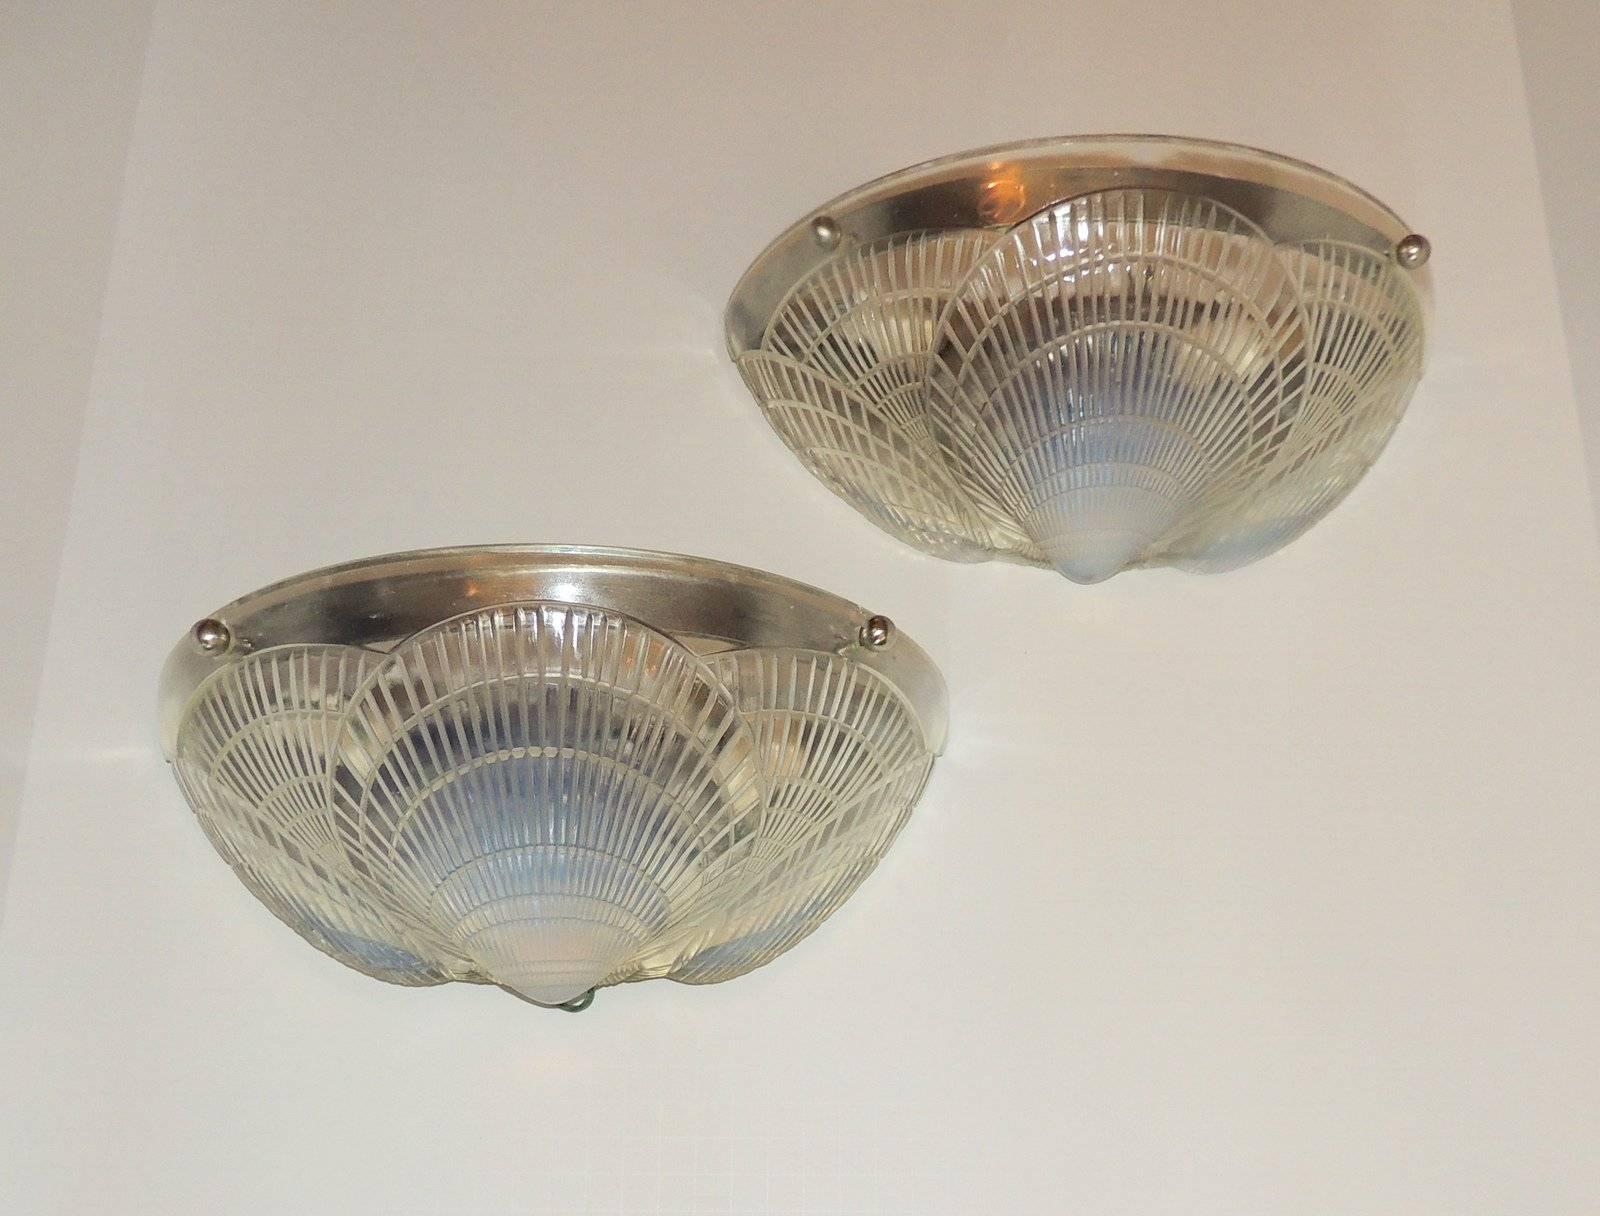 A wonderful pair of Lalique style frosted single coquille two-light molded opalescent Art Deco glass wall sconces

Measures: 5" D x 11-5/8" L x 5 5/8" W.